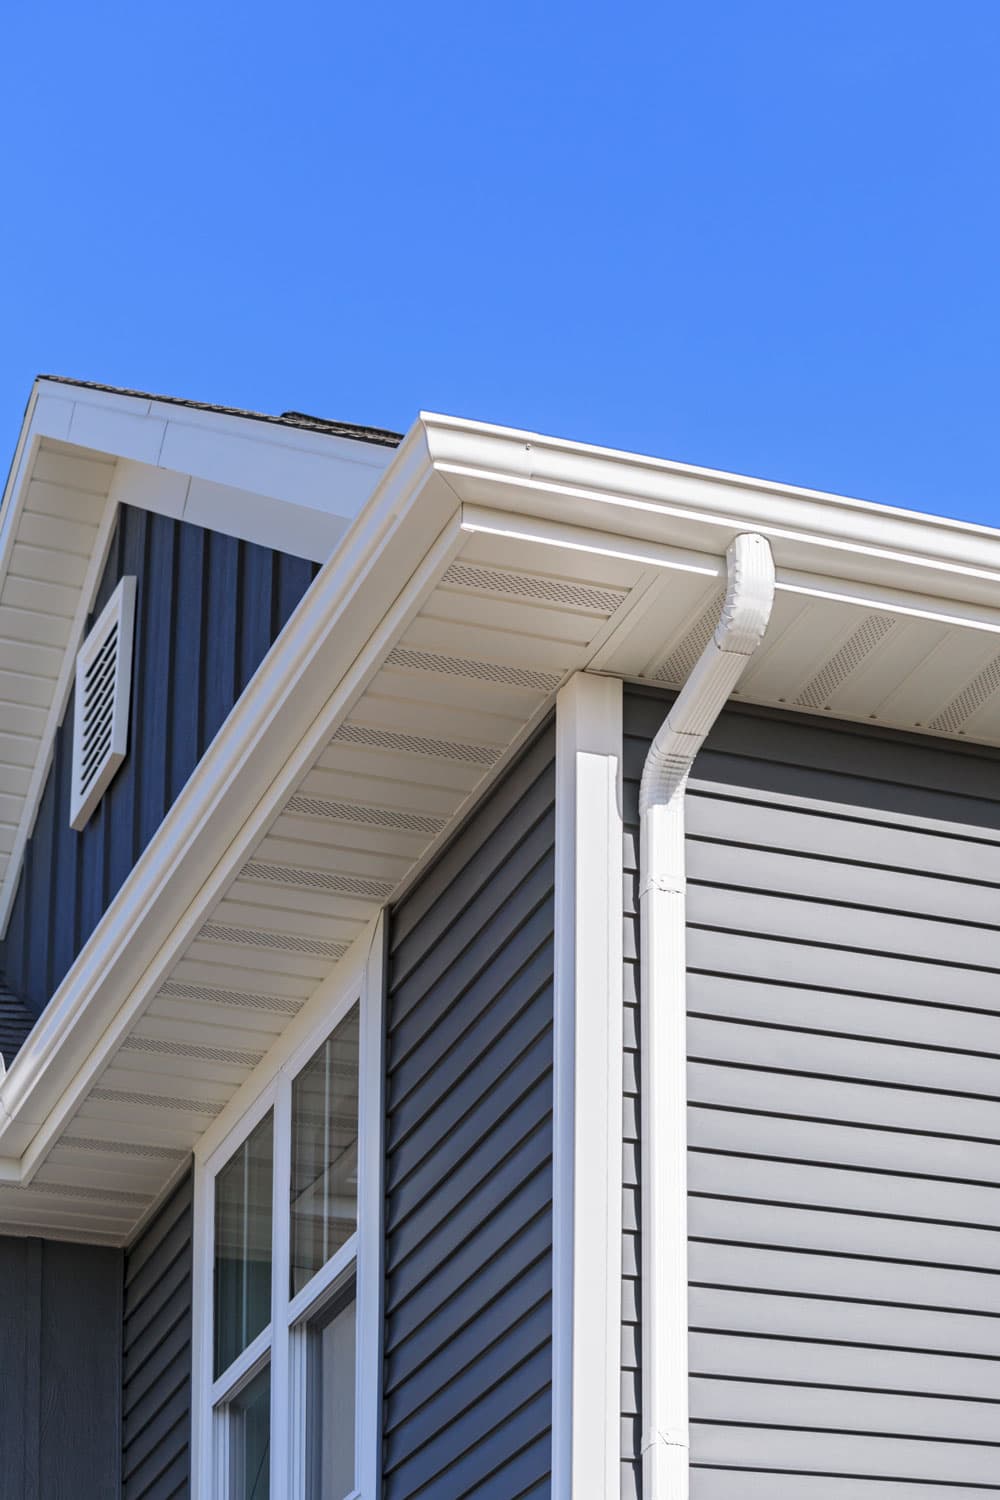 White aluminum soffit board of a two story house